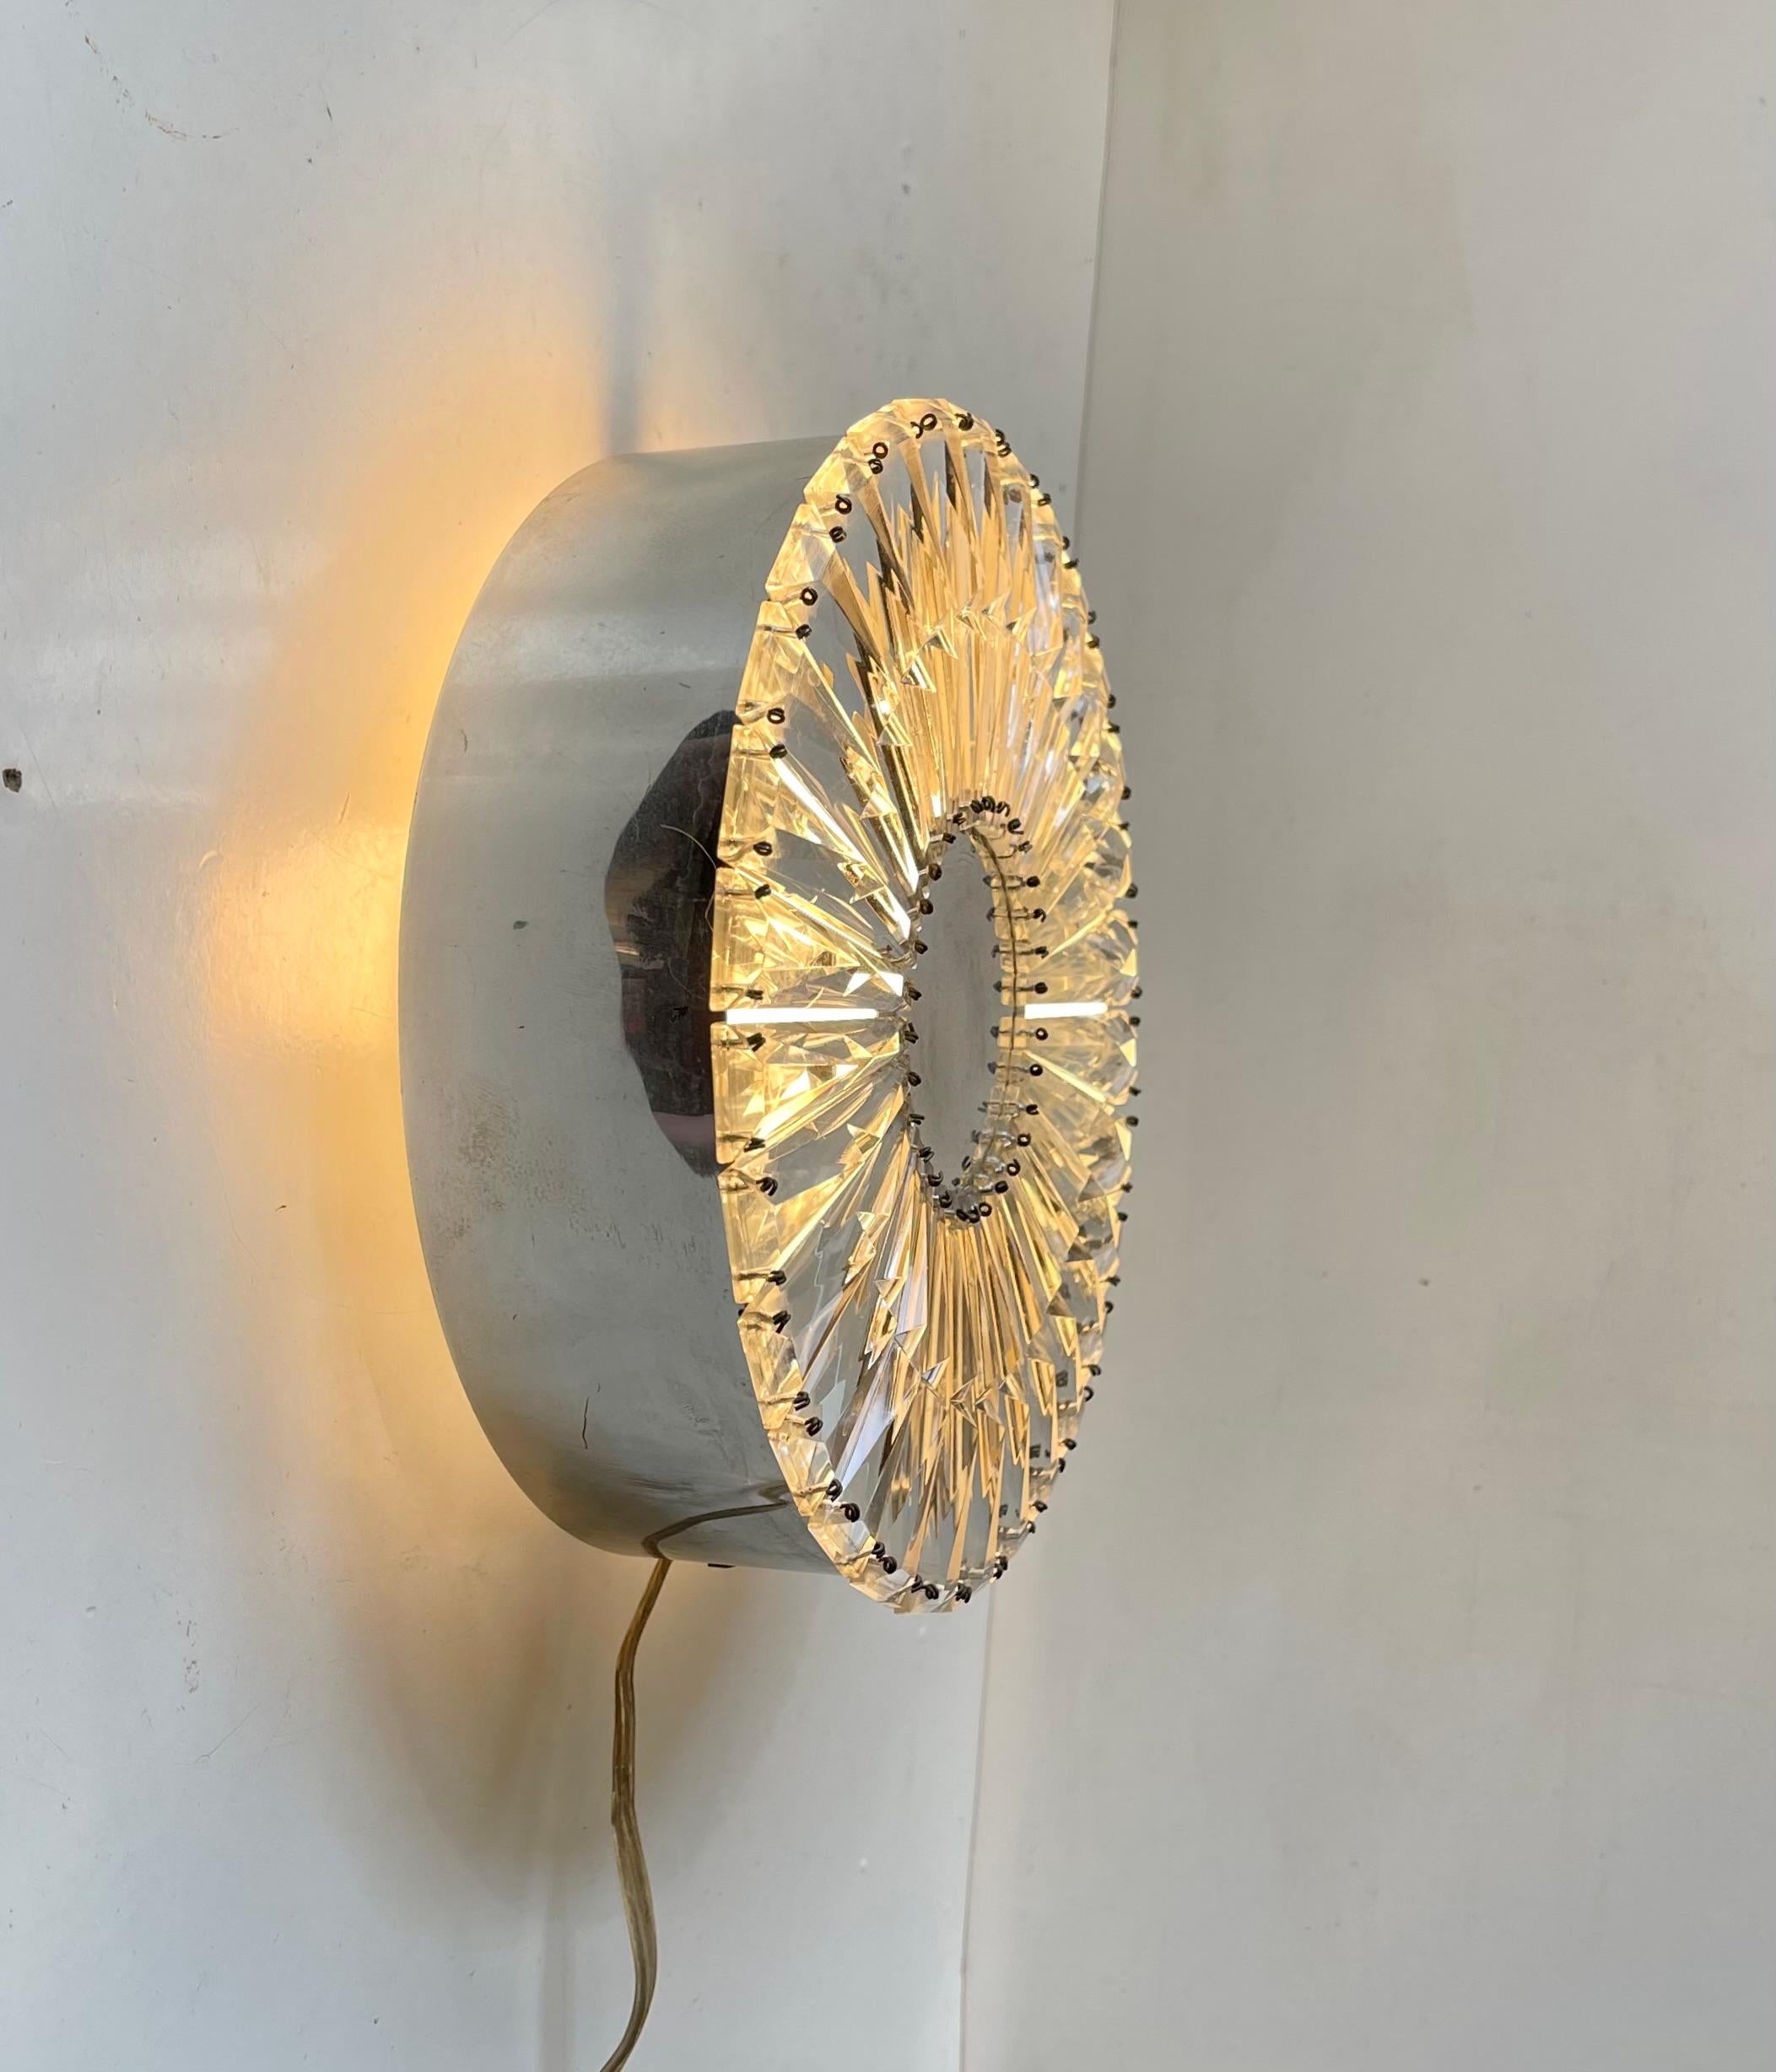 Faceted Midcentury German Cut Crystal Wall Sconce by Glashütte Limburg, 1960s For Sale